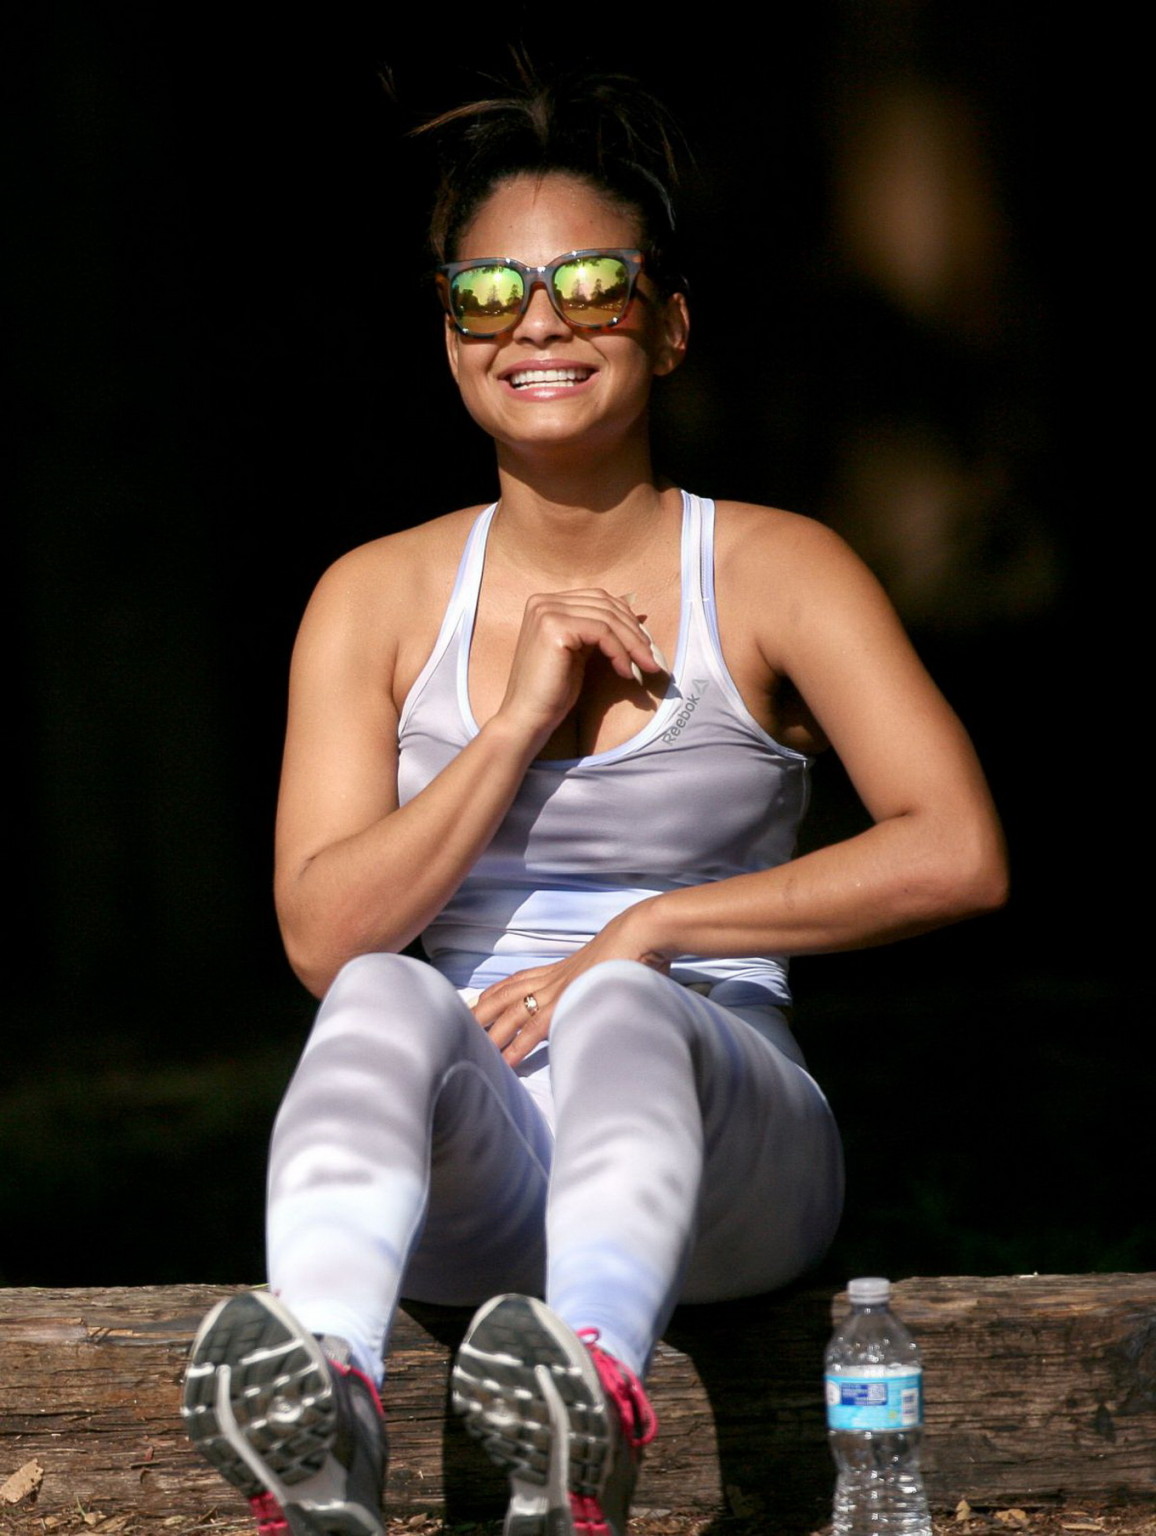 Christina Milian busty and booty in tiny top and tights while working out at the #75173924